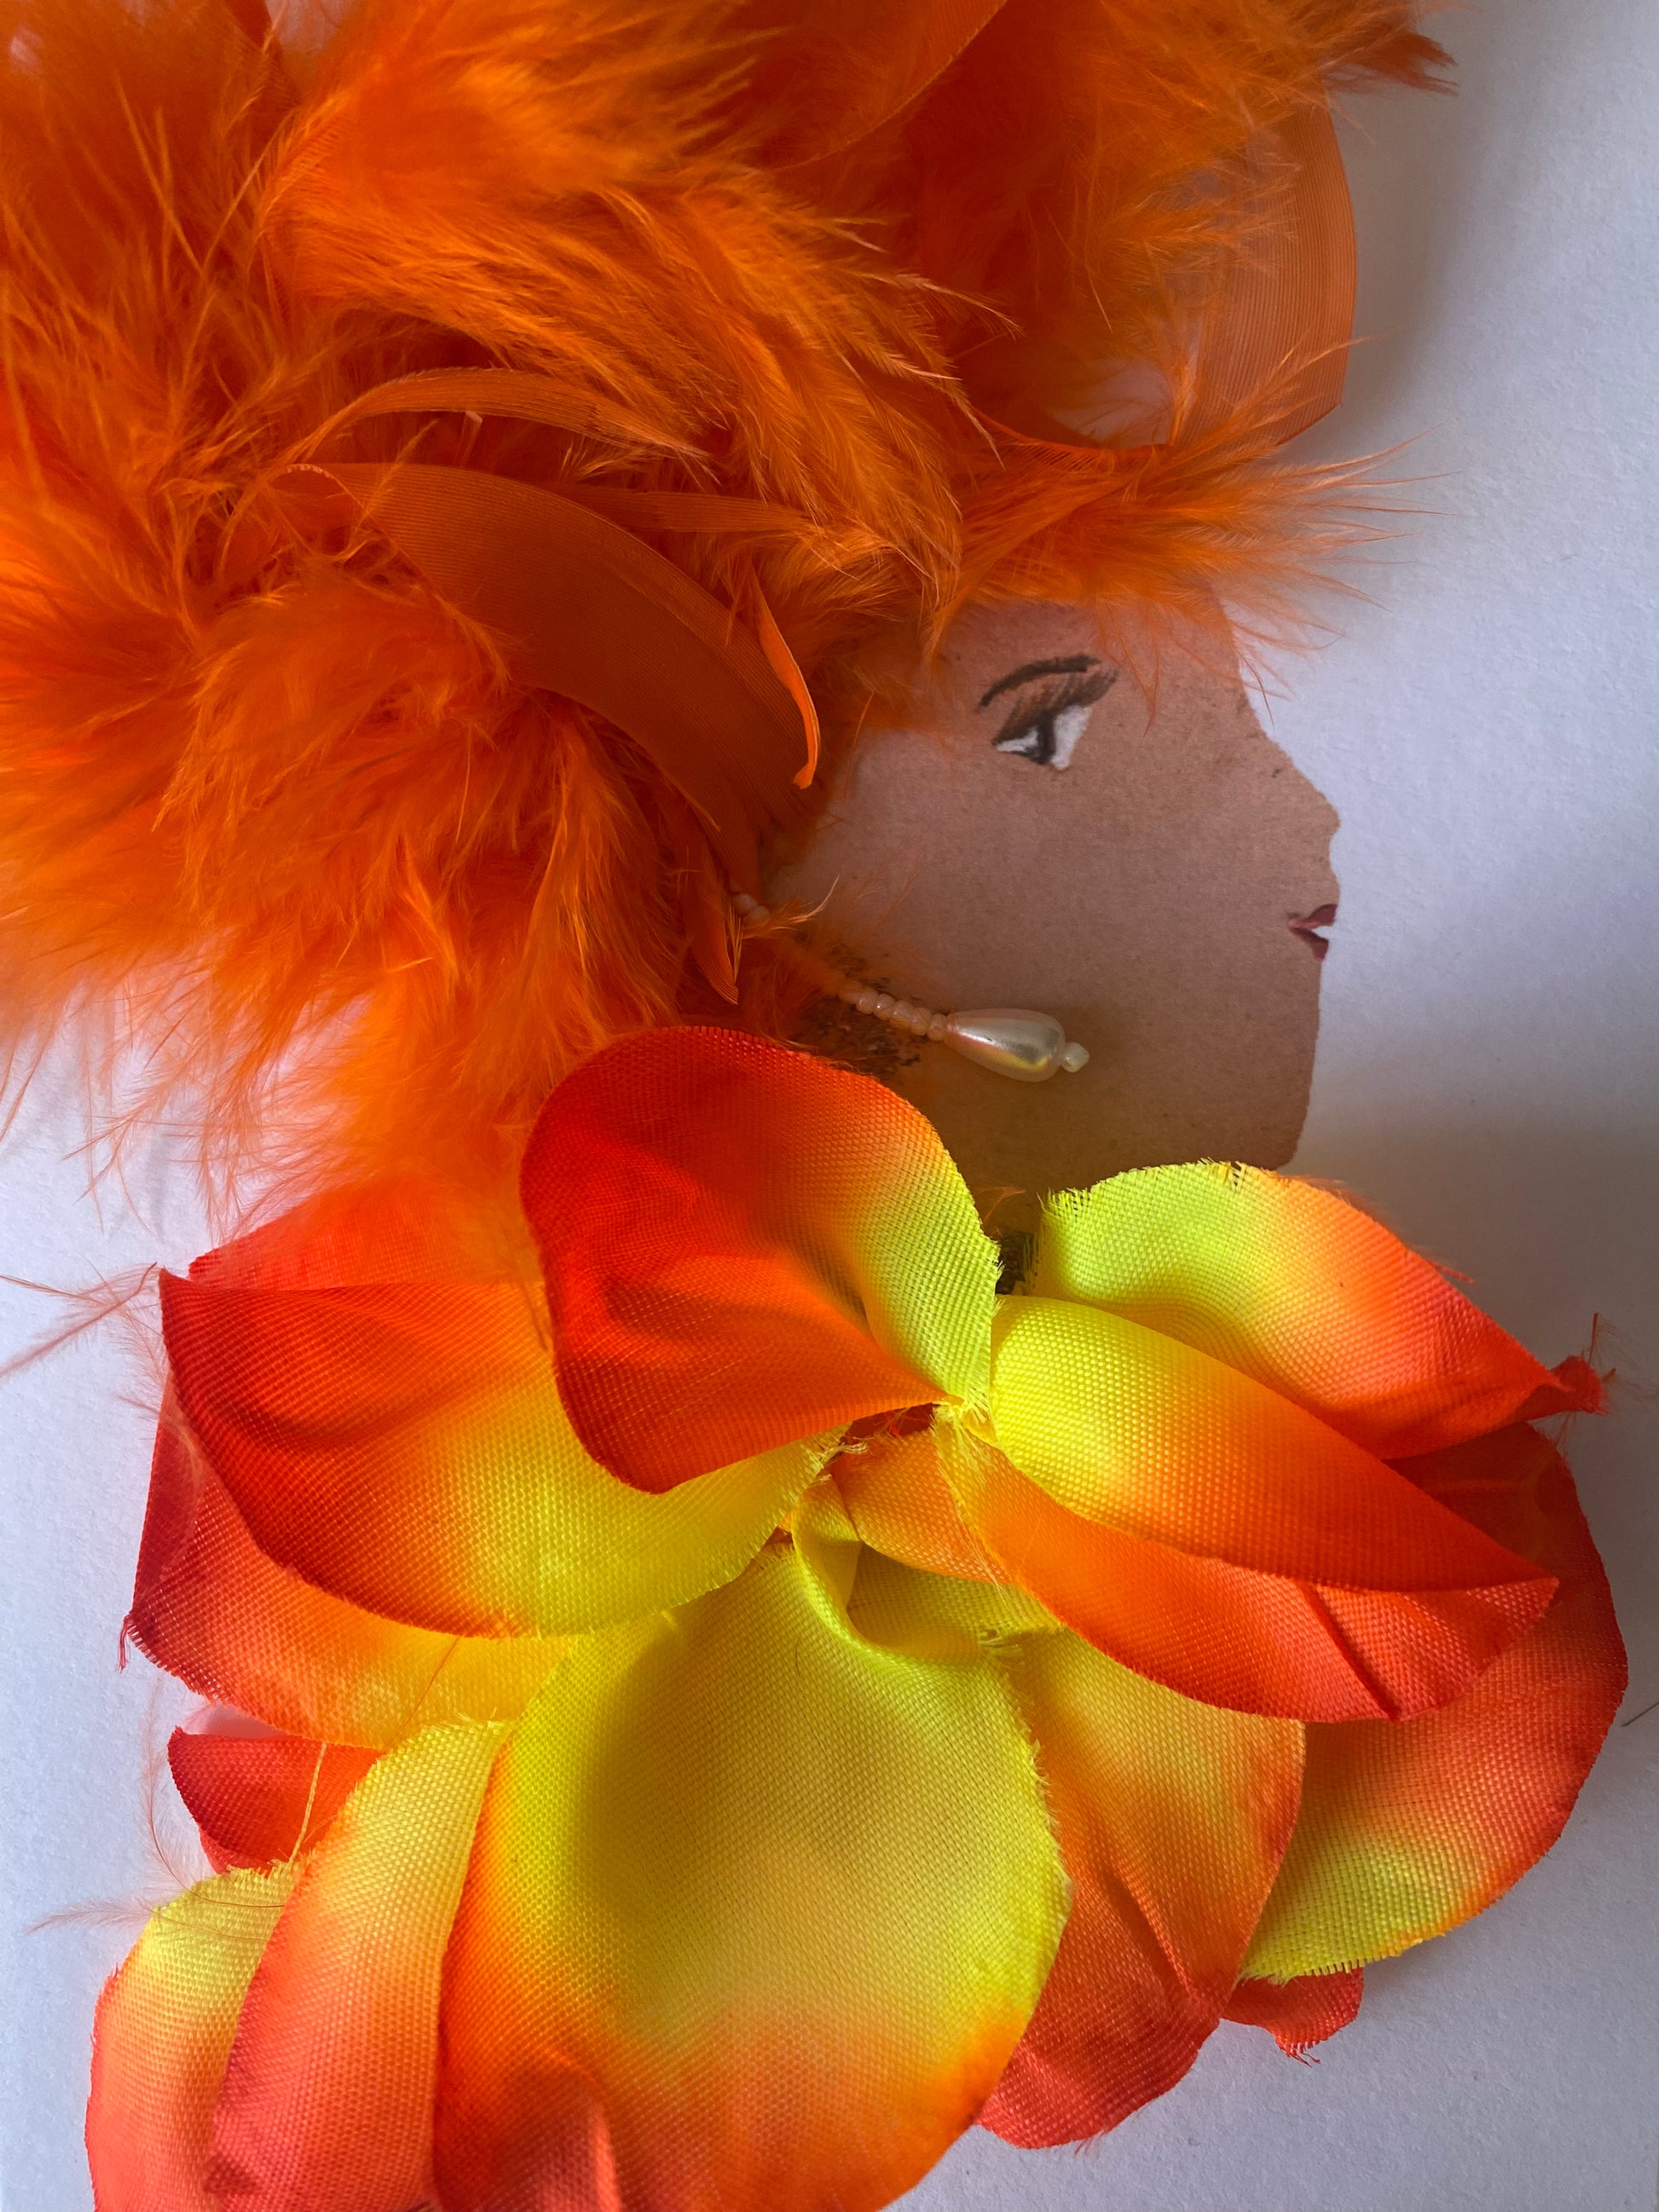 I designed this card of a woman named Magnificent Millie. She has a white skin tone and is wearing an array of electric orange feather in her hair. She wears a blouse full of orange and yellow flower petals. She wears dangle pearl earrings.